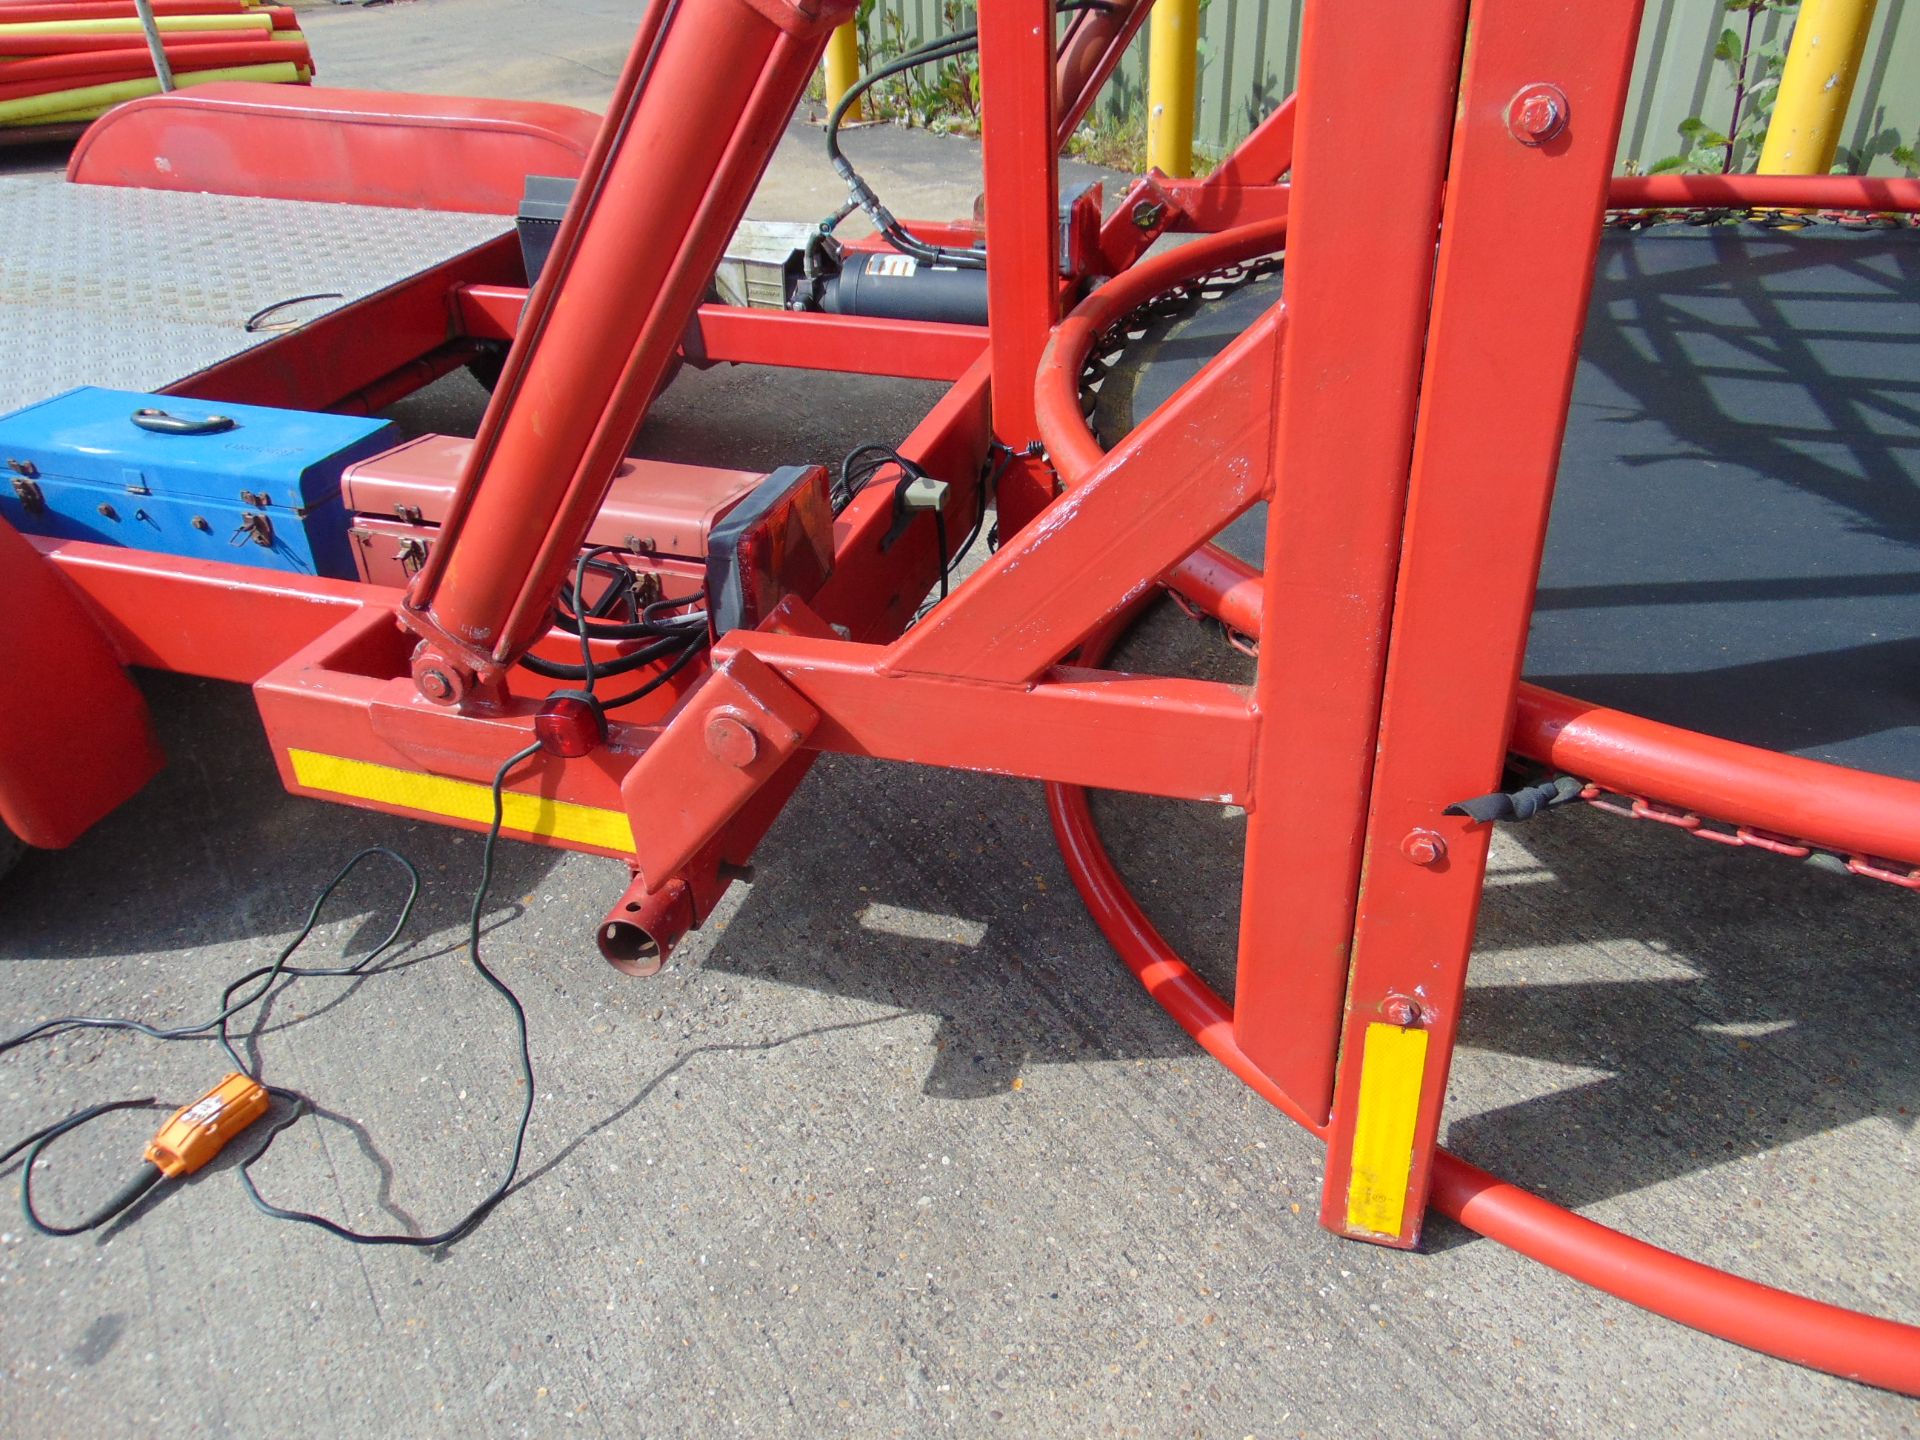 Vertical Reality Spider Mountain climbing system on mobile transport trailer - Image 17 of 47